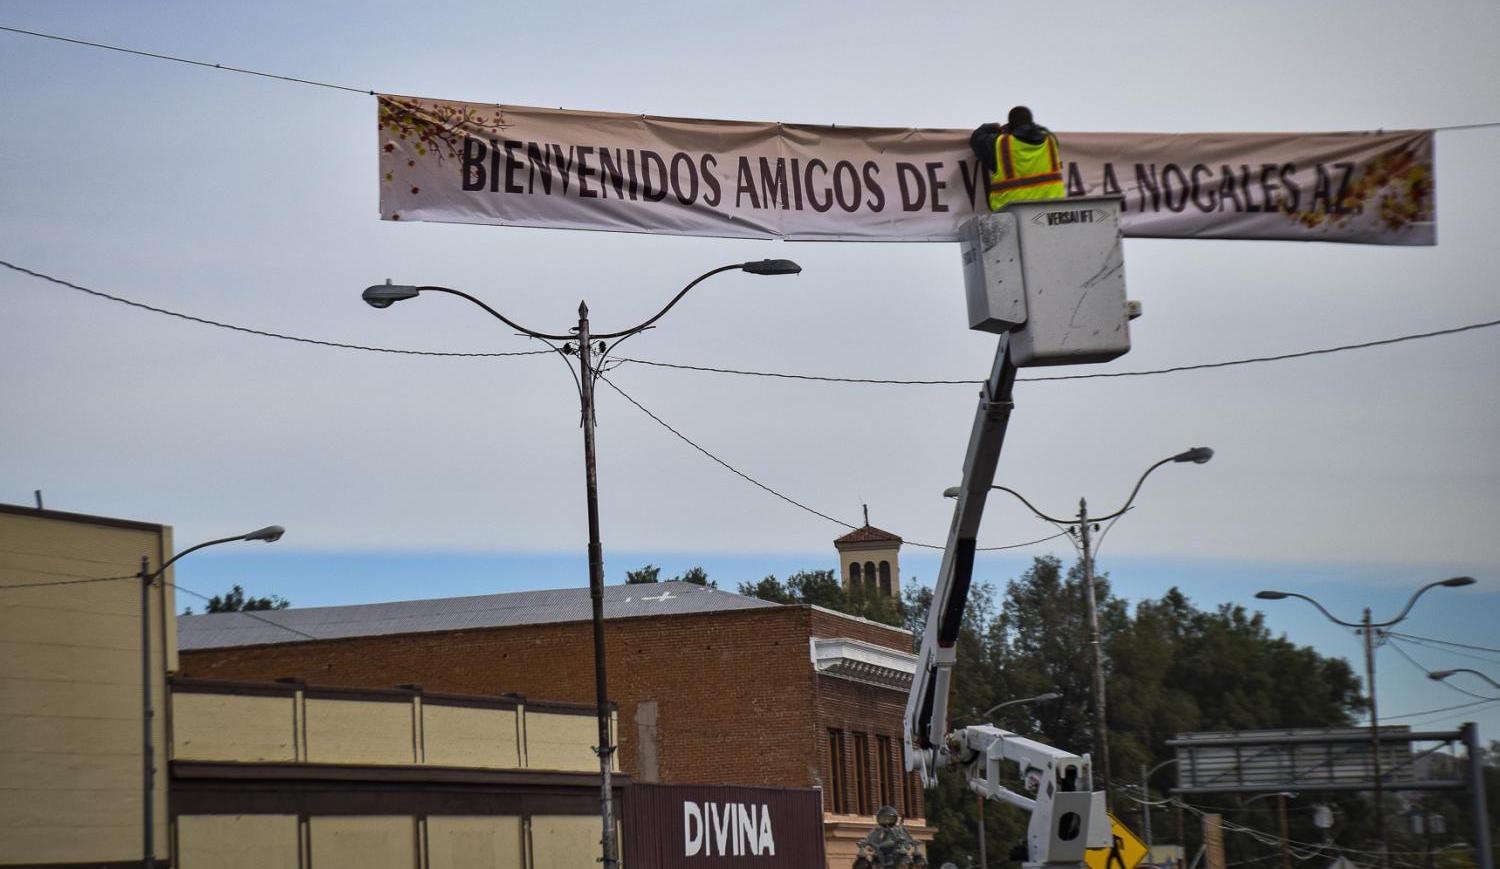 Nogales, Arizona, strung up a welcome banner for people crossing into the town after the restrictions were lifted.